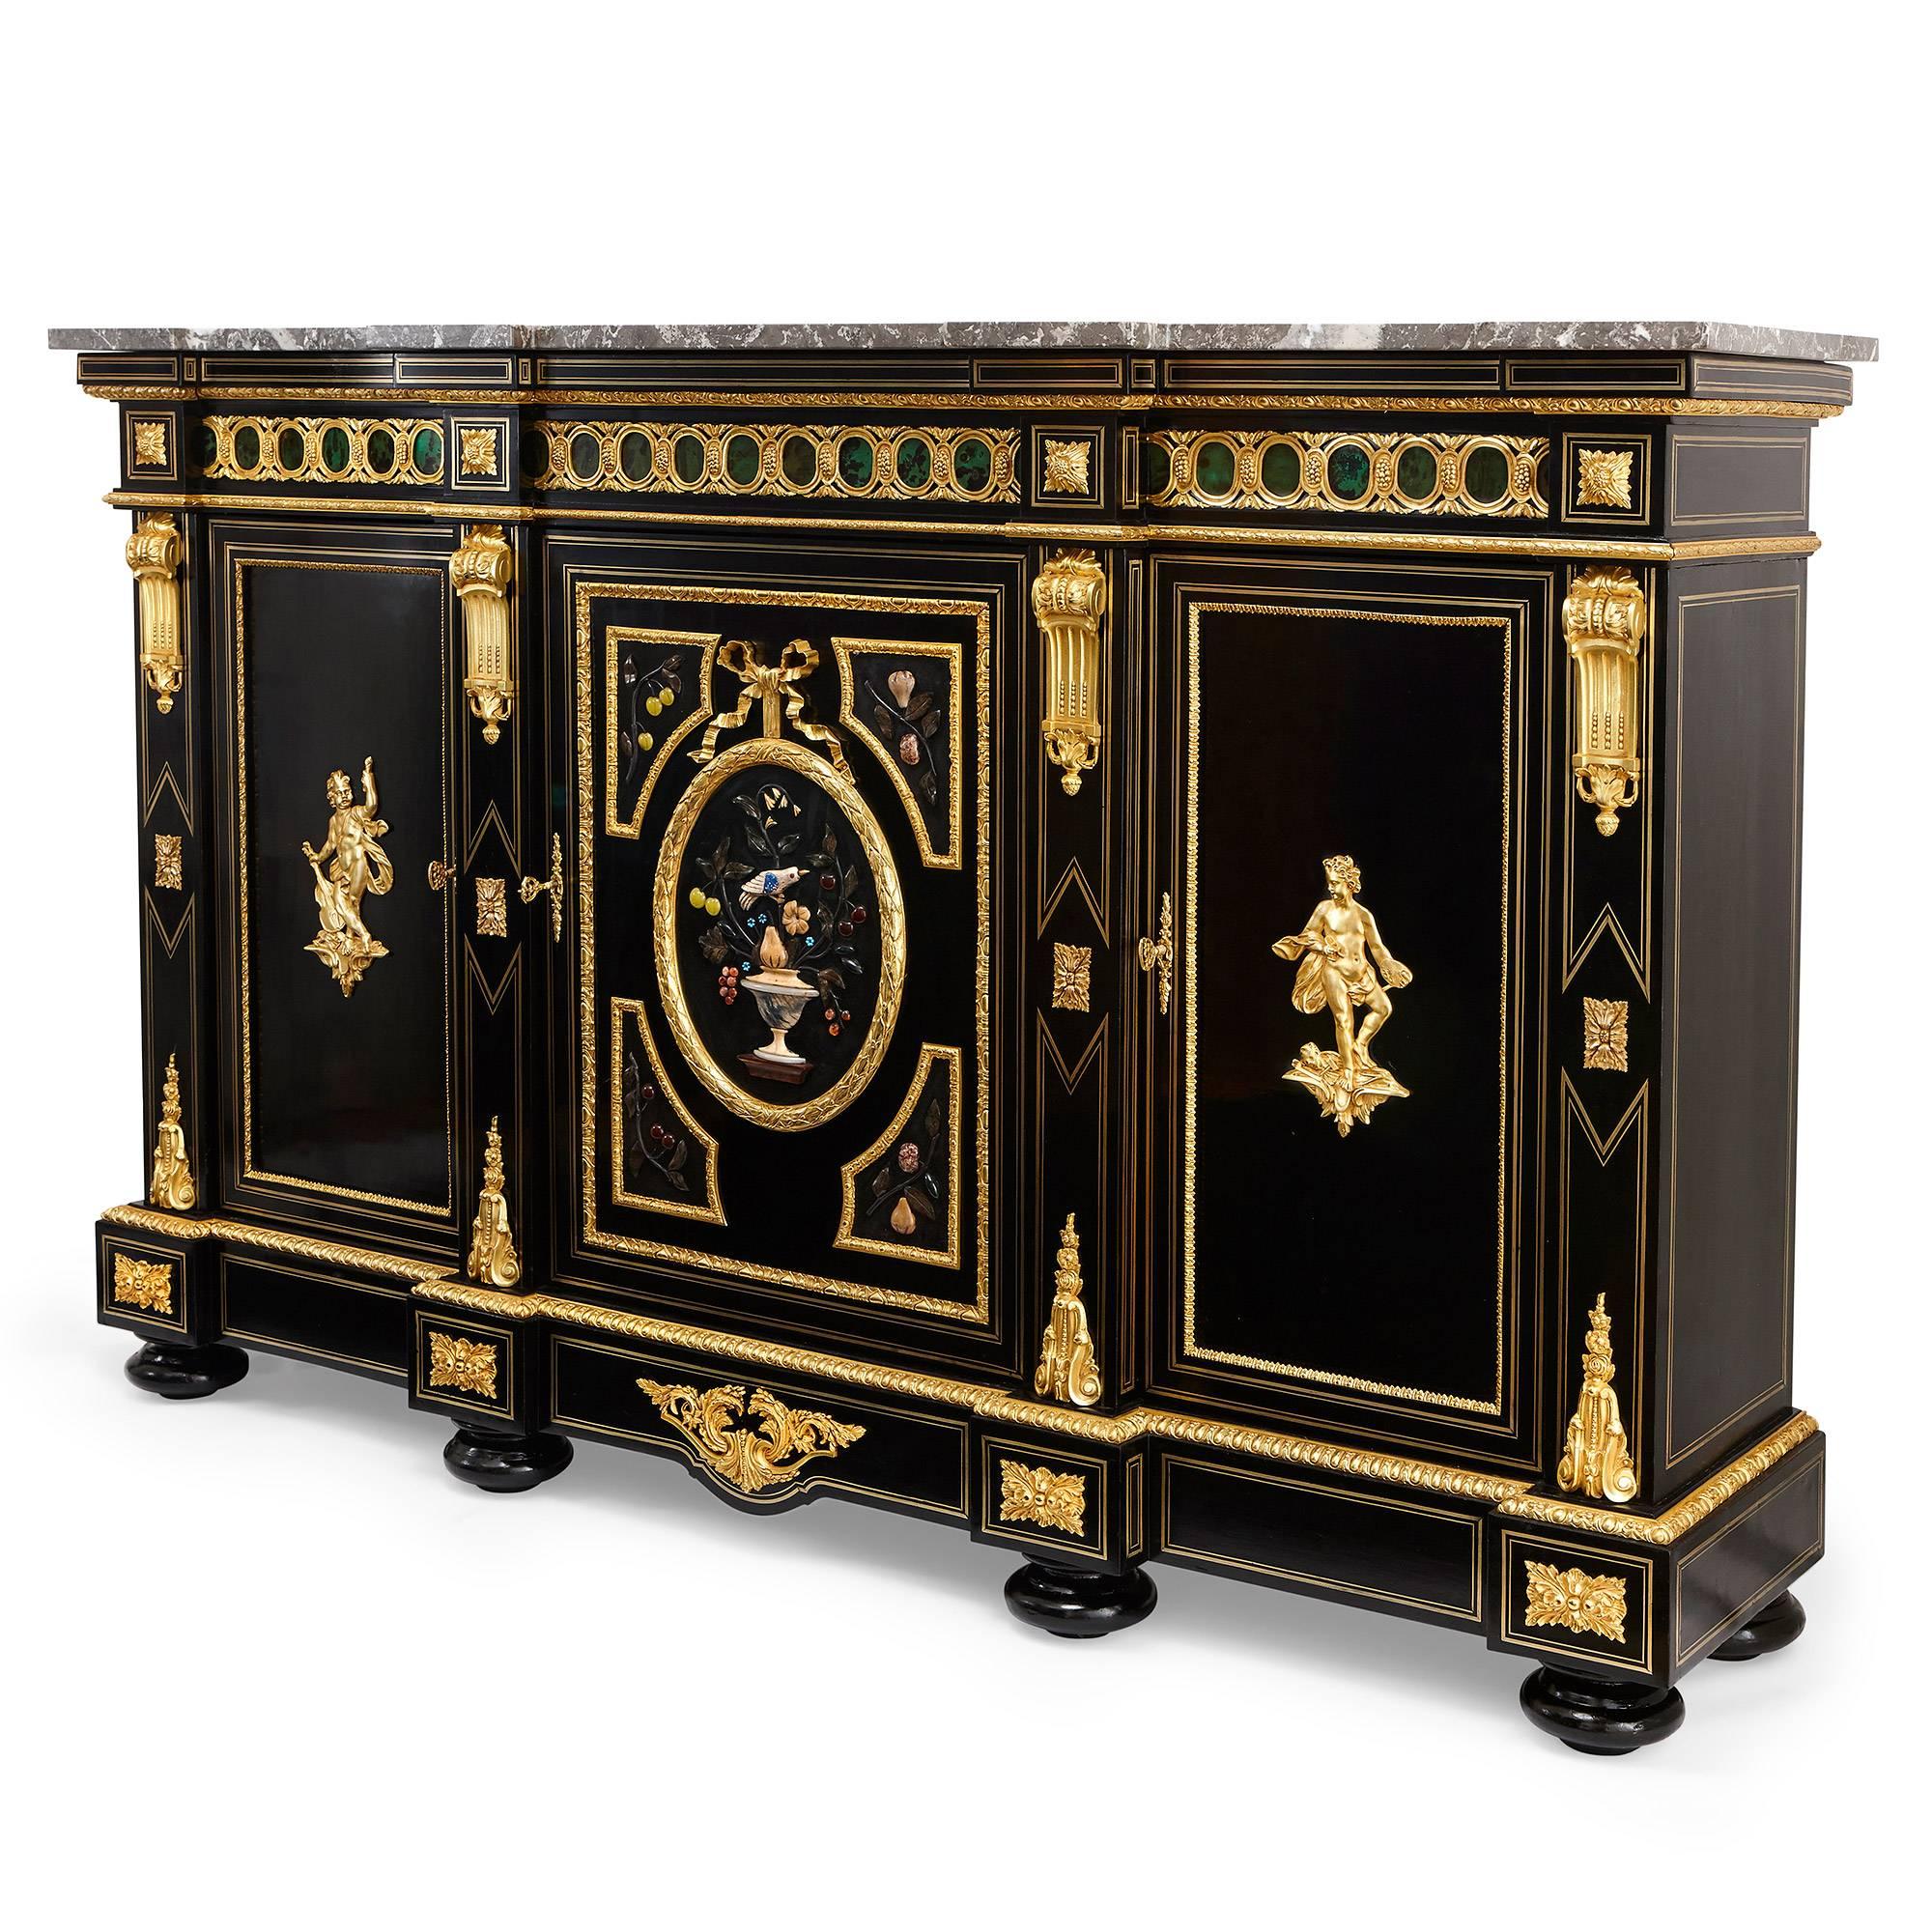 This exceptional ebonized wood antique cabinet is a brilliant example of the high quality furniture produced during the Napoleon III period. Featuring a marble top with outset corners and an gilt bronze (ormolu) cast banding over a green colored